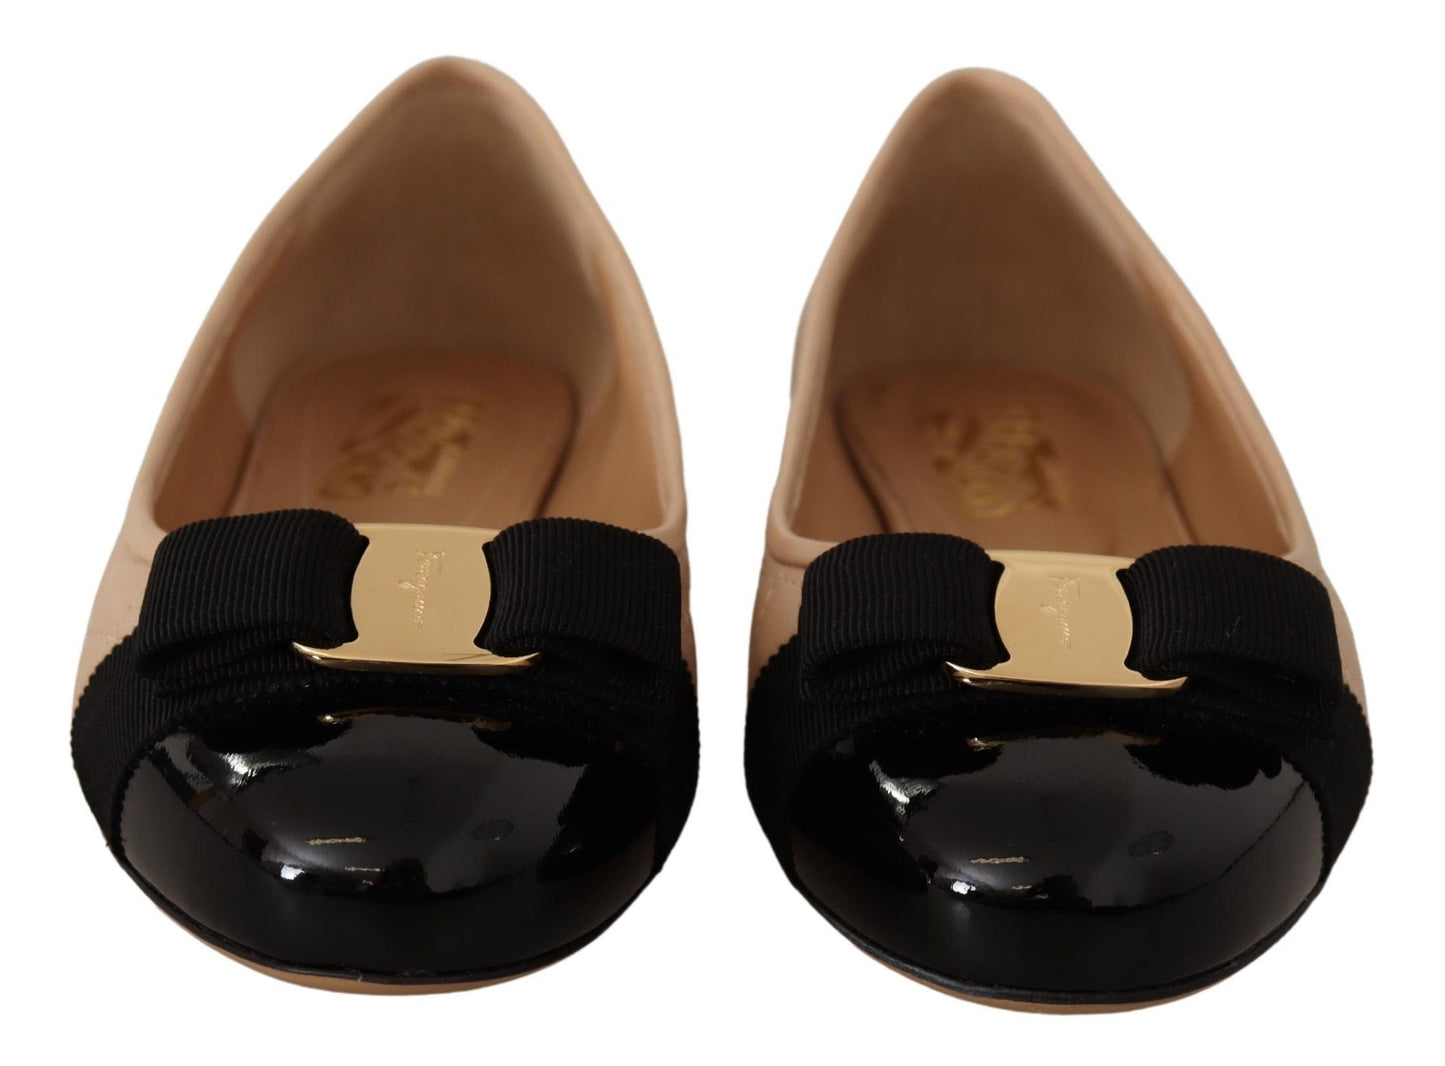 Elegant Quilted Leather Flats - Chic Dual-Tone Design